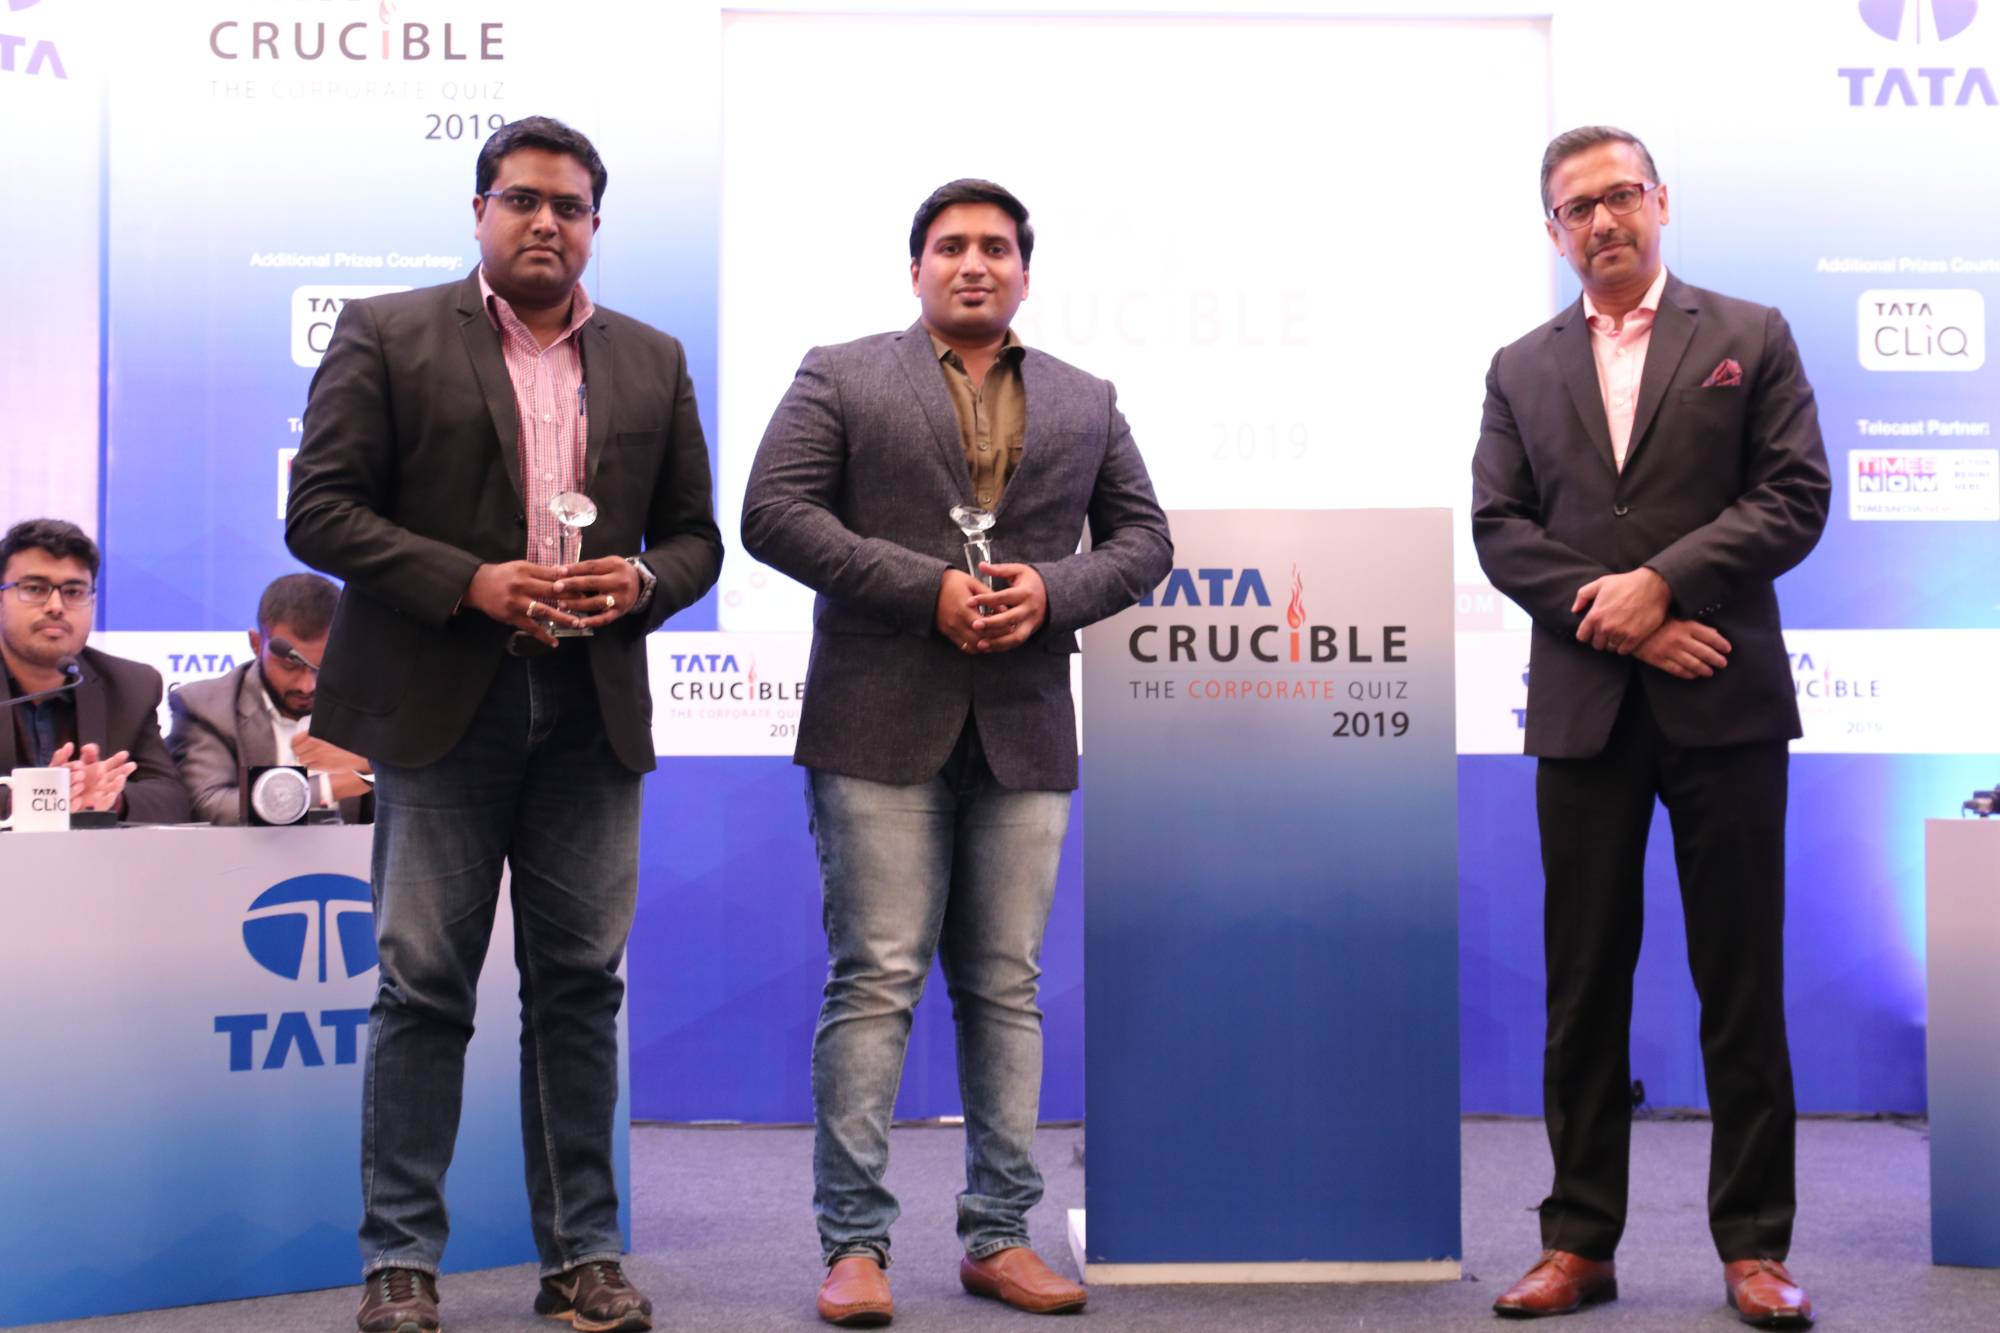 Tata Crucible Corporate Quiz Results For Runners - BSP (SAIL) 